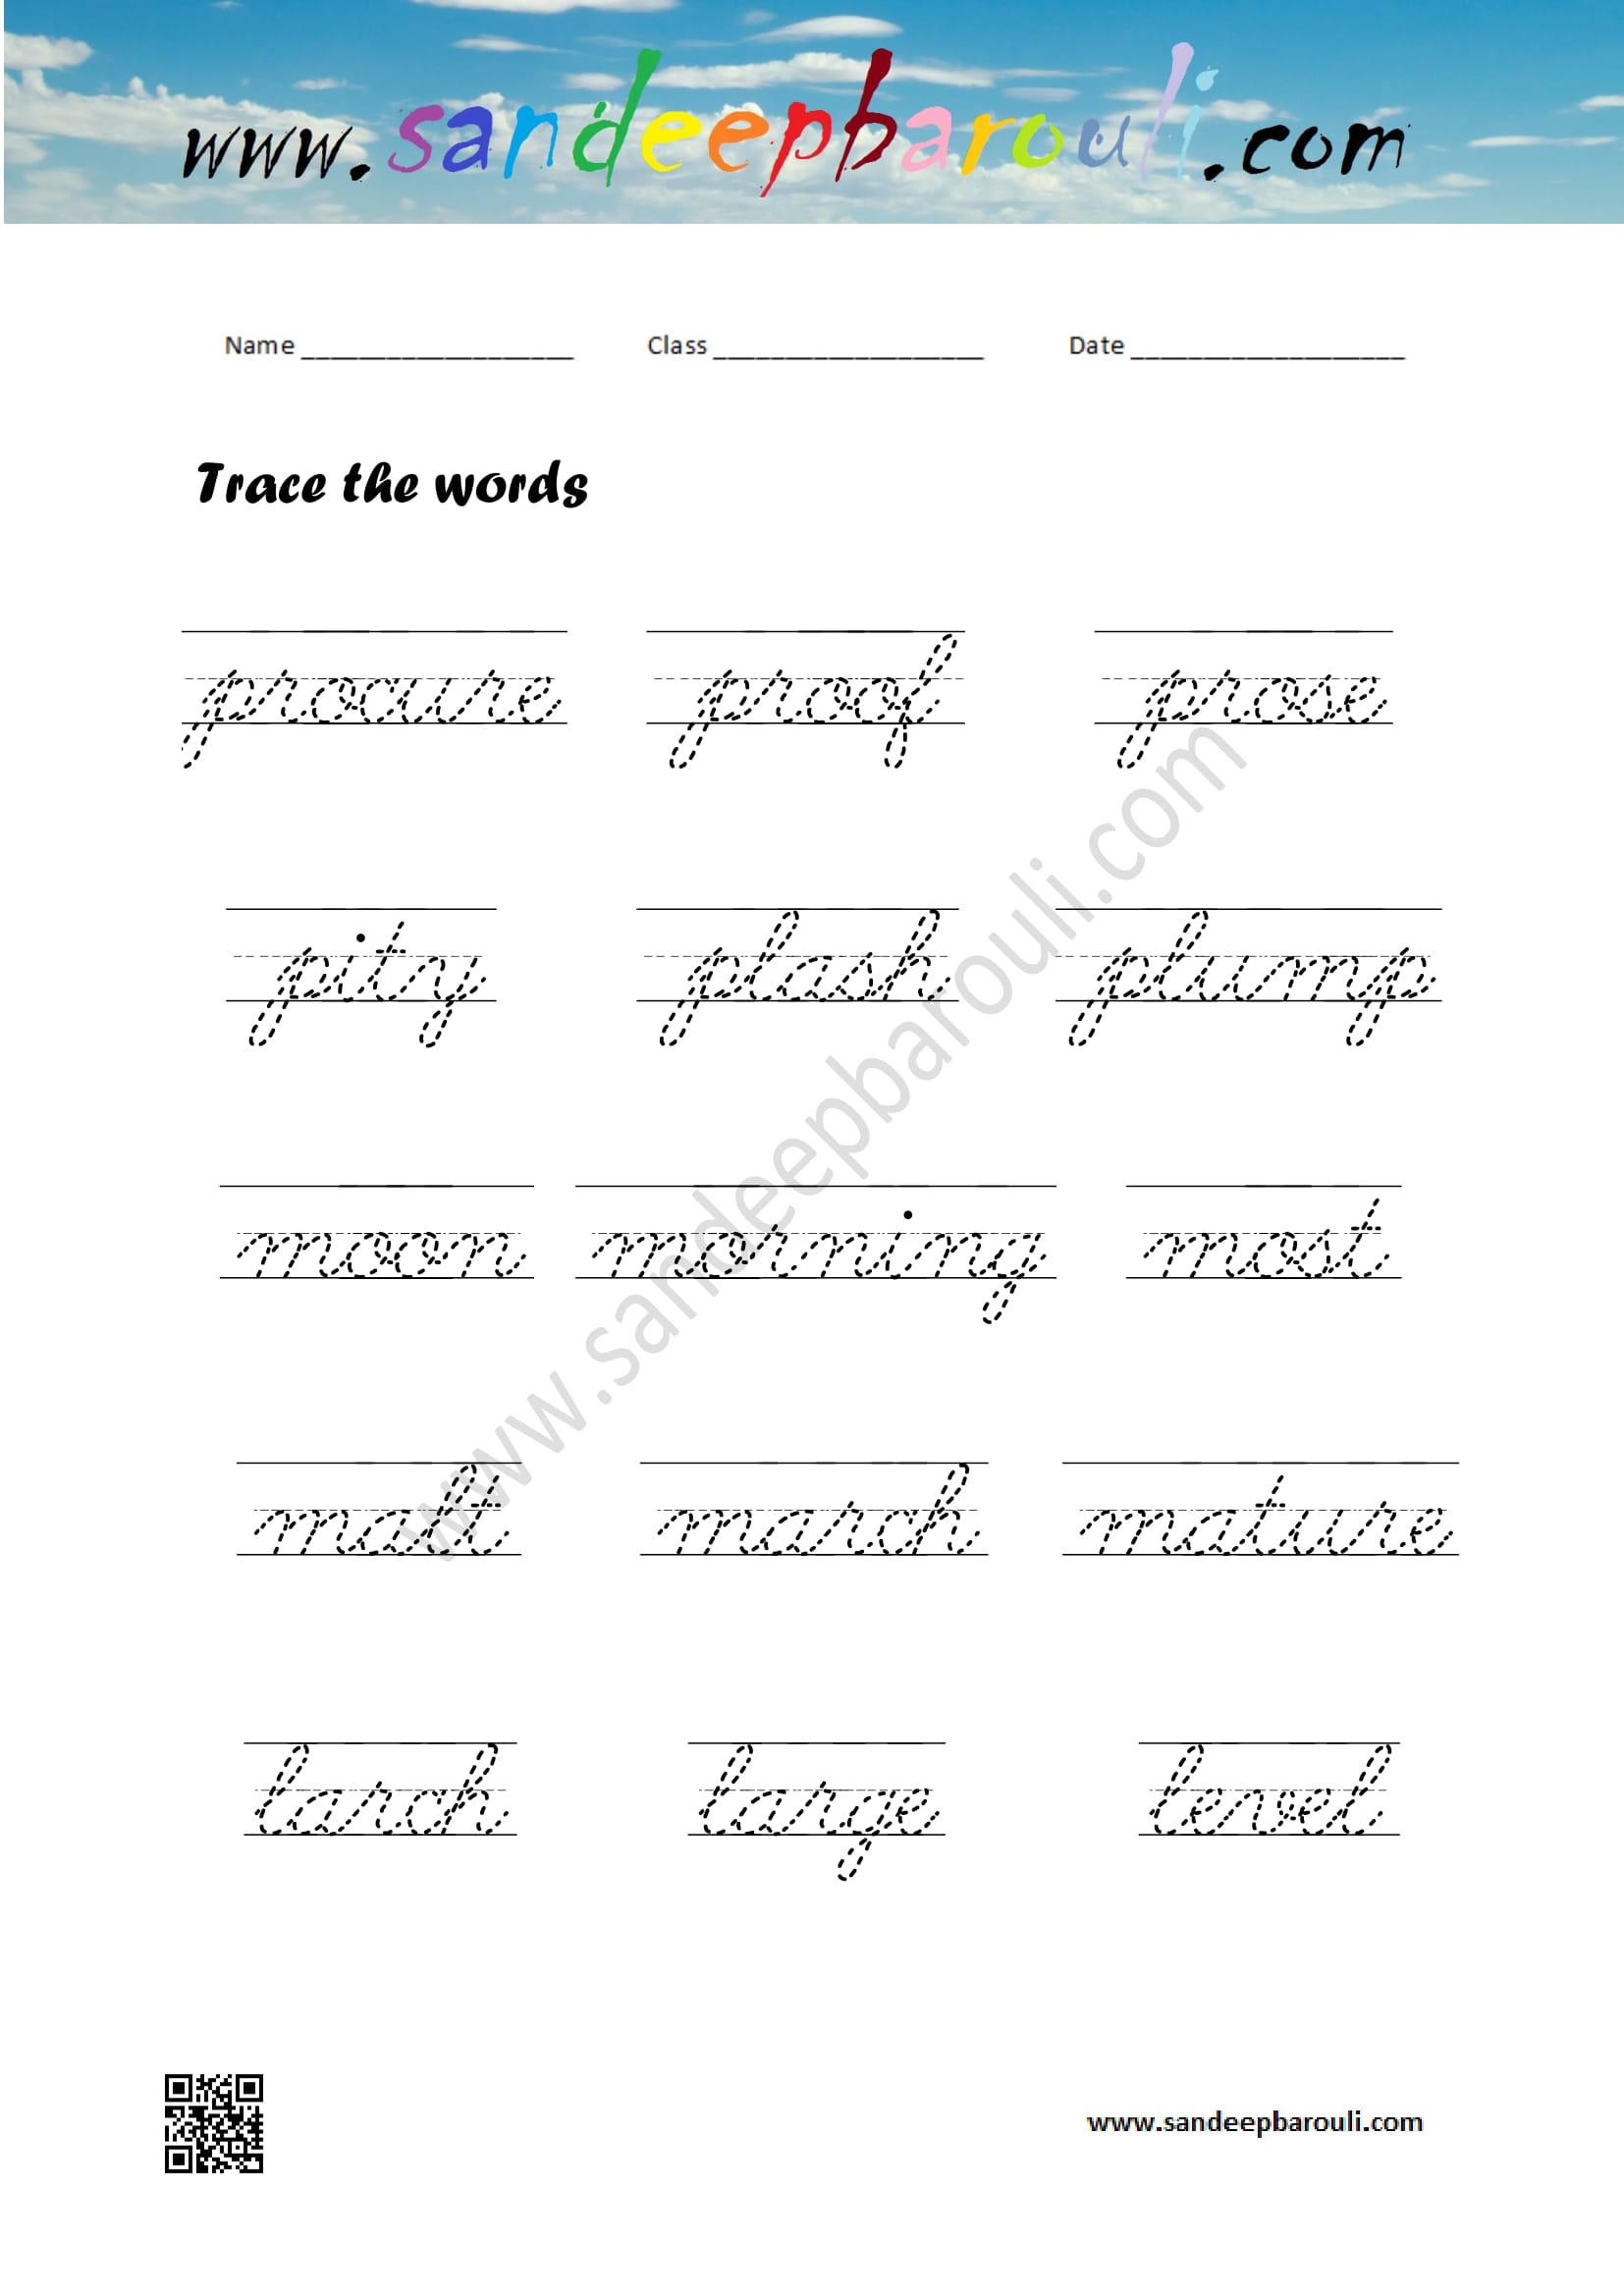 Cursive Writing Worksheet – Trace the words (55)